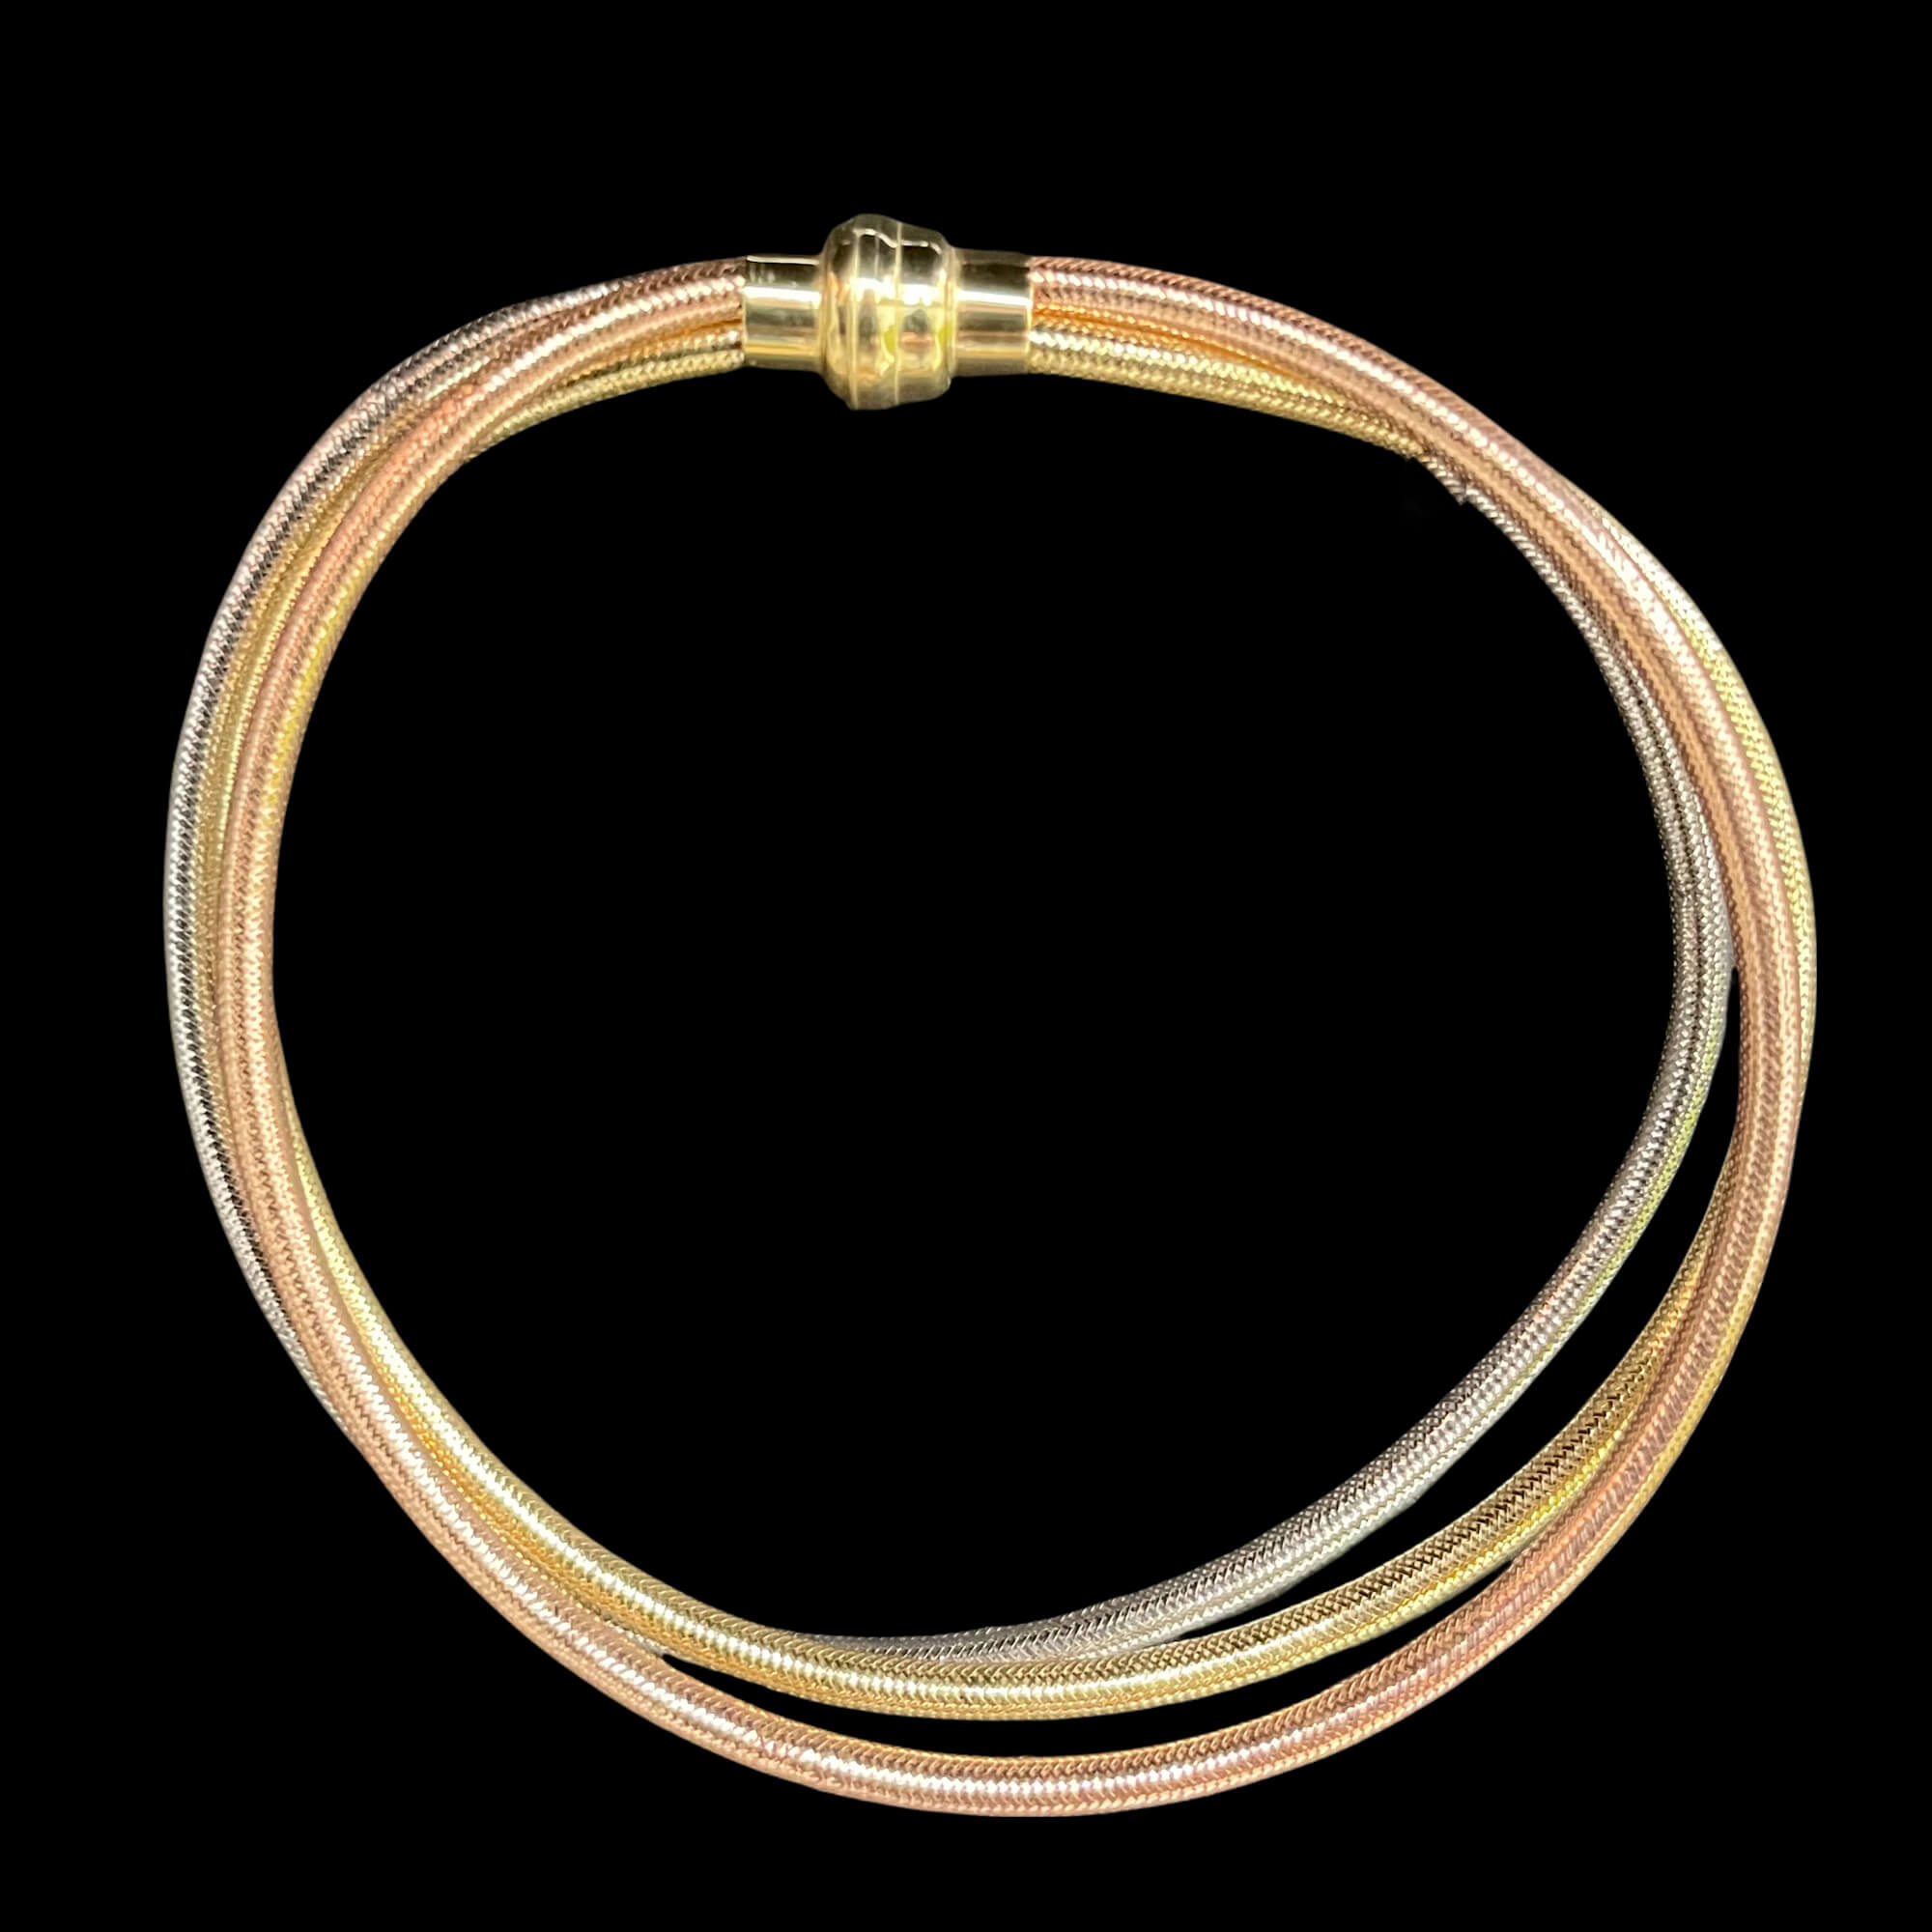 Three wire Omega bracelet of 3 colors Gold 18kt and Silicone